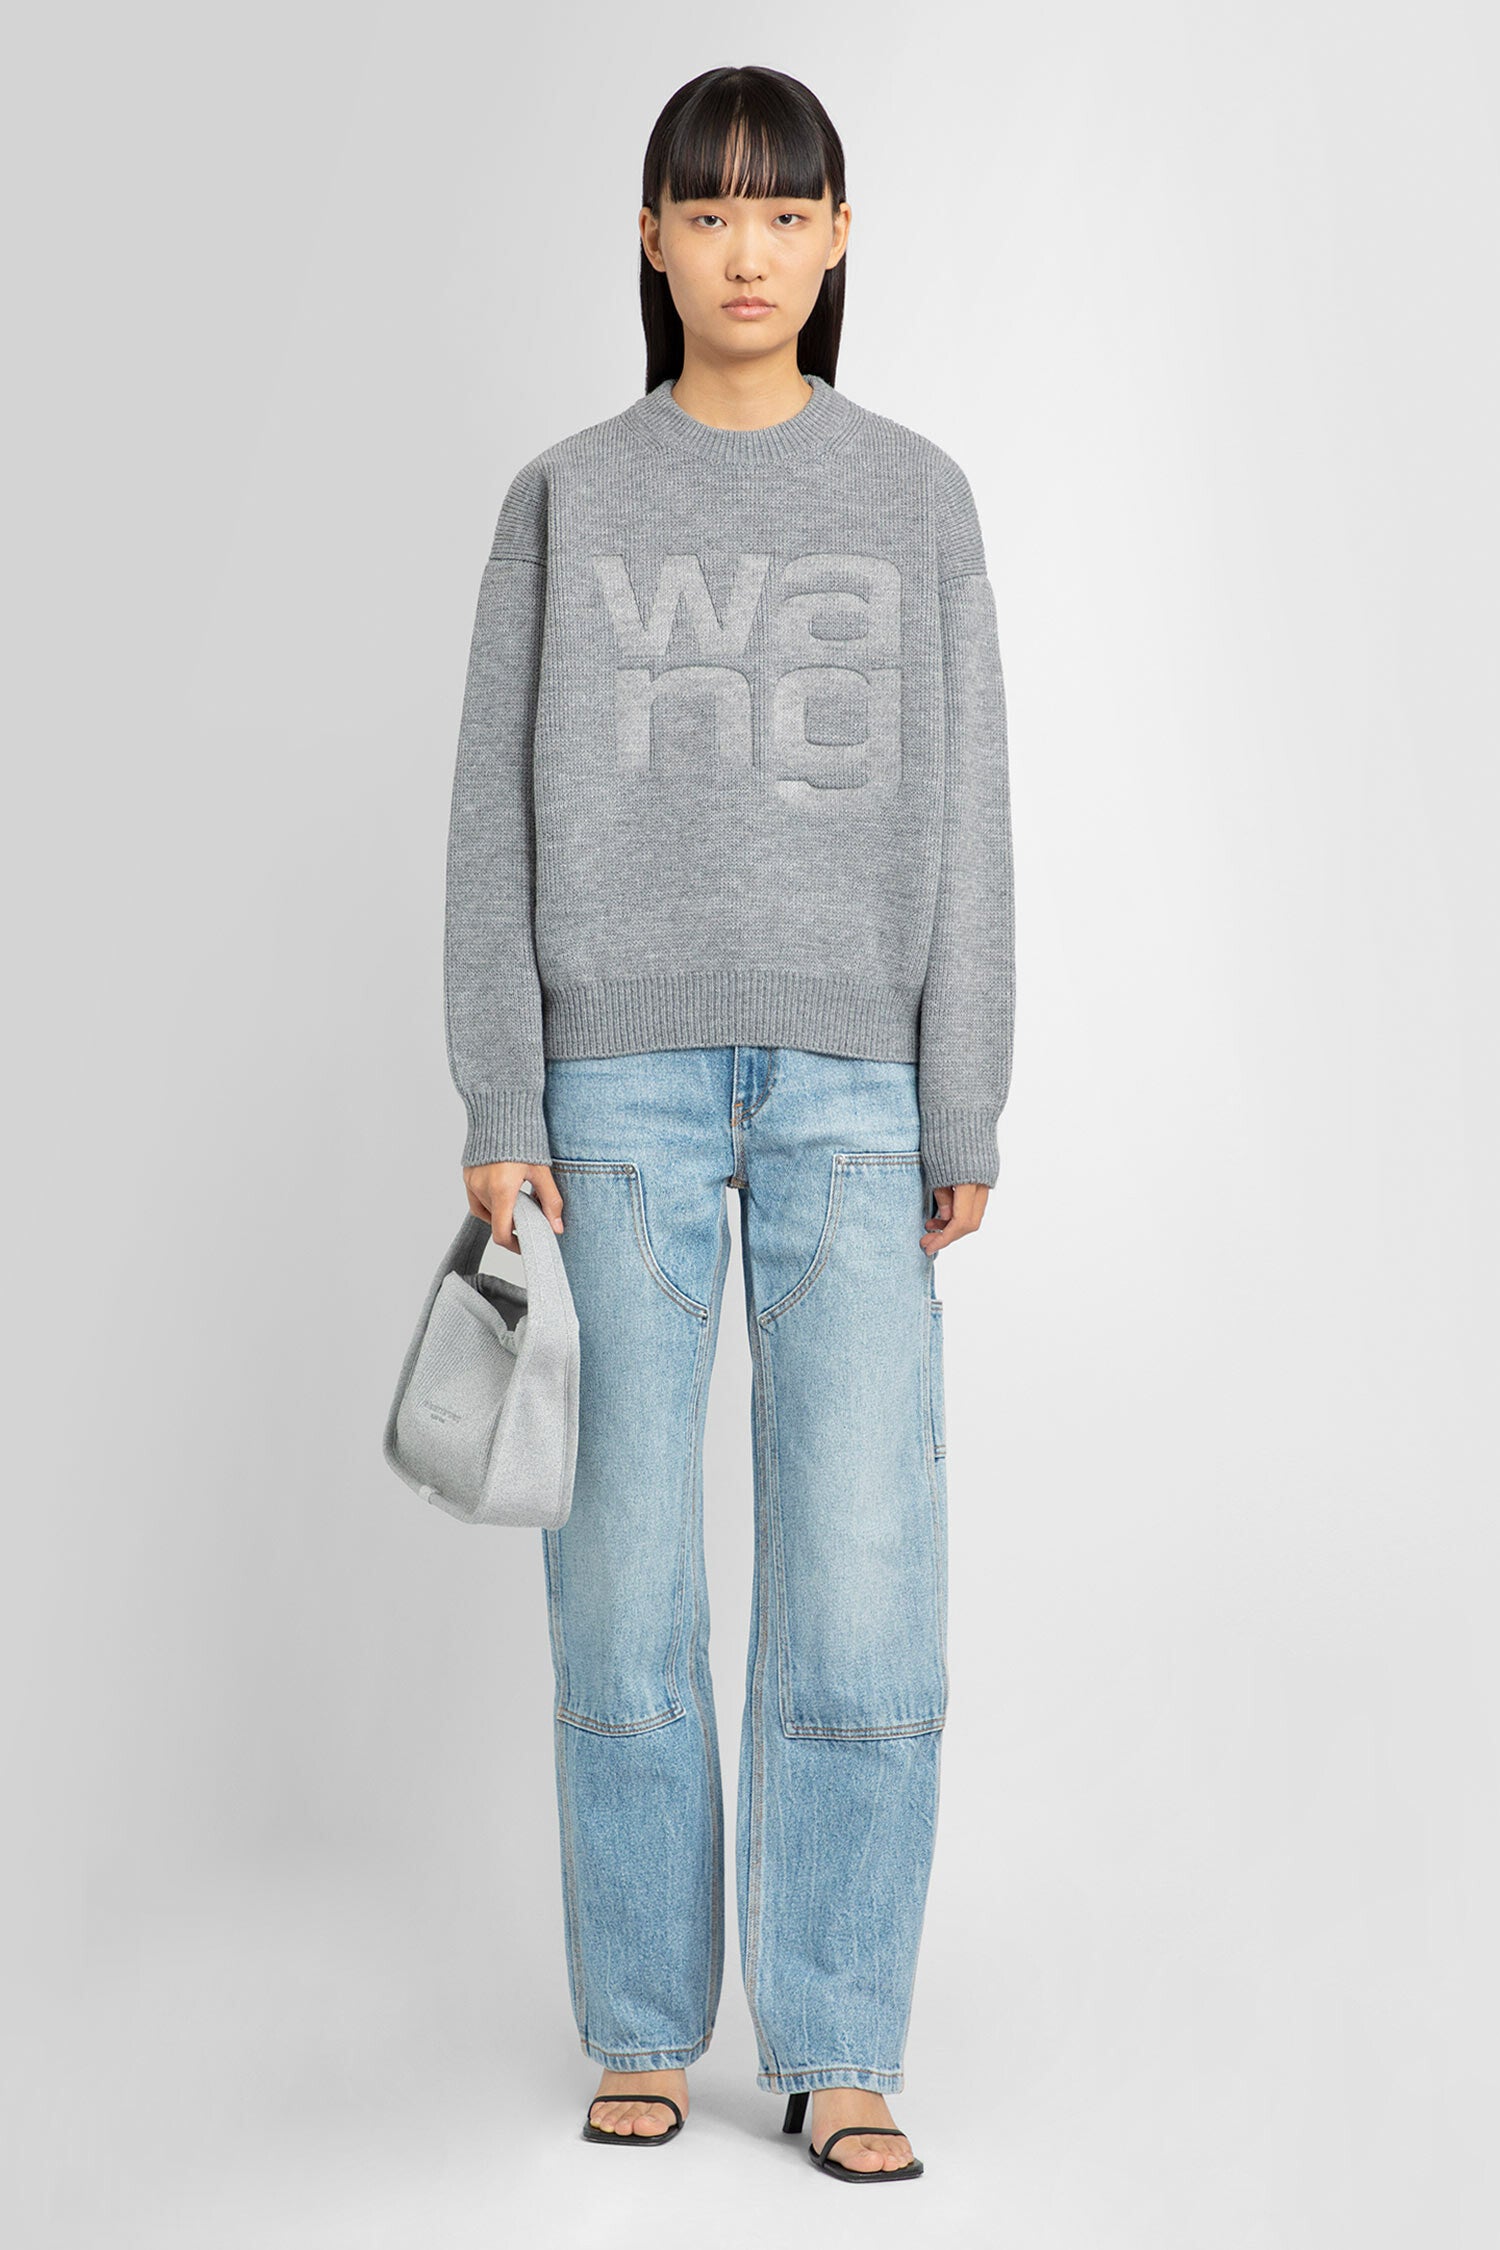 Gray Patch Sweater by Alexander Wang on Sale